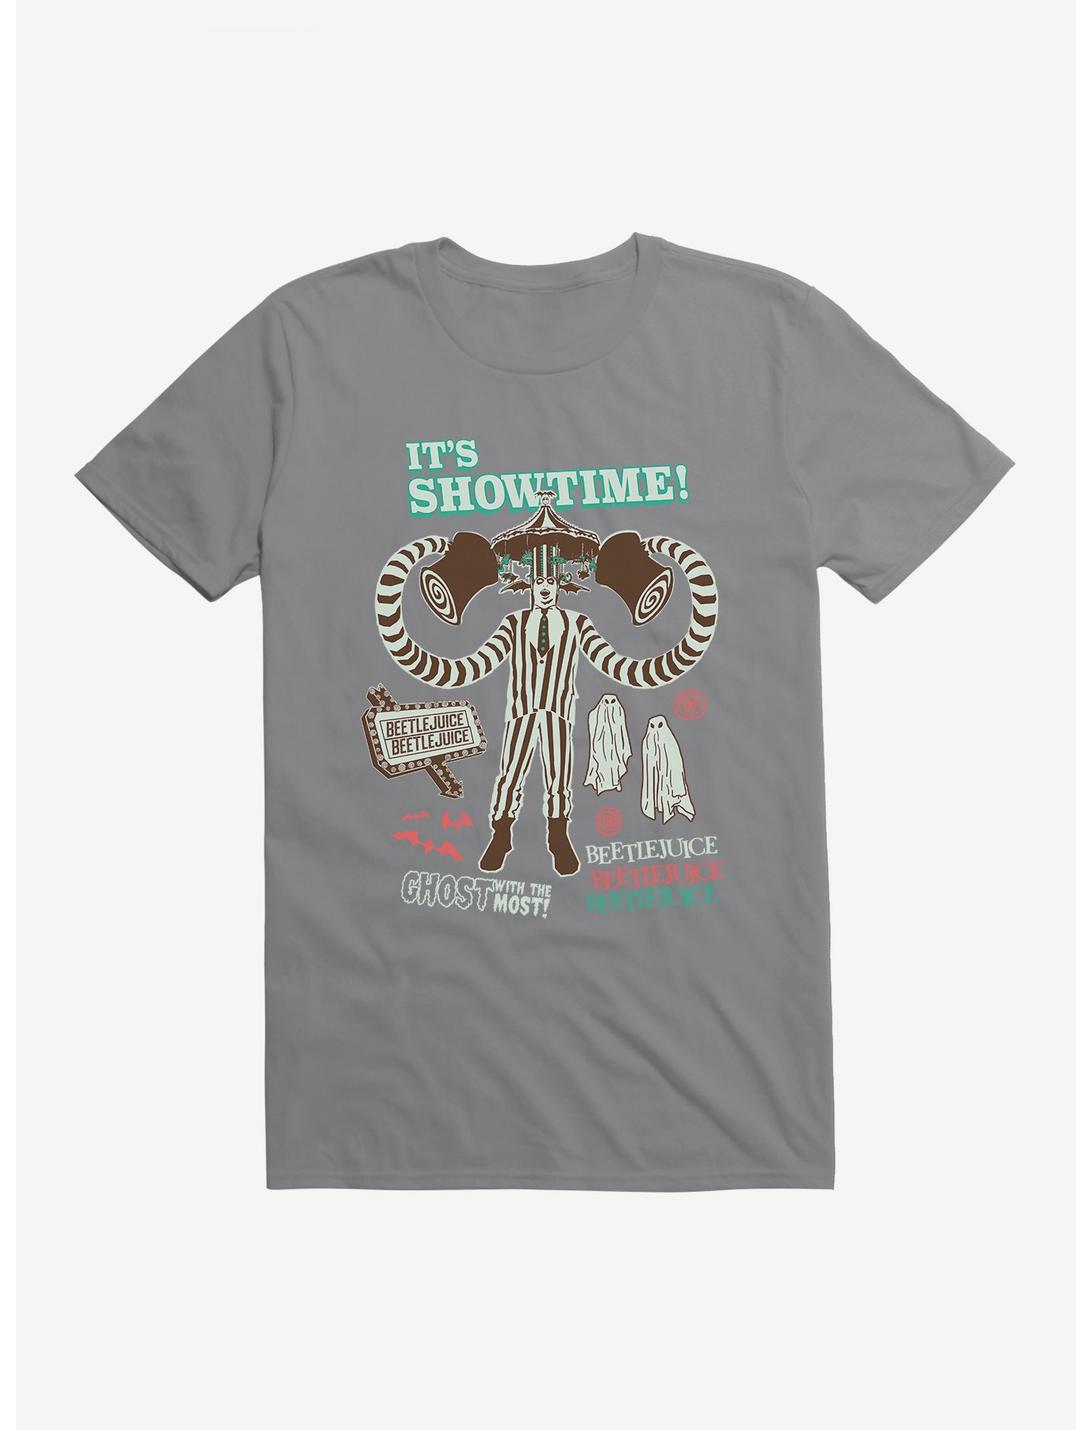 Beetlejuice Ghost With The Most! T-Shirt, , hi-res